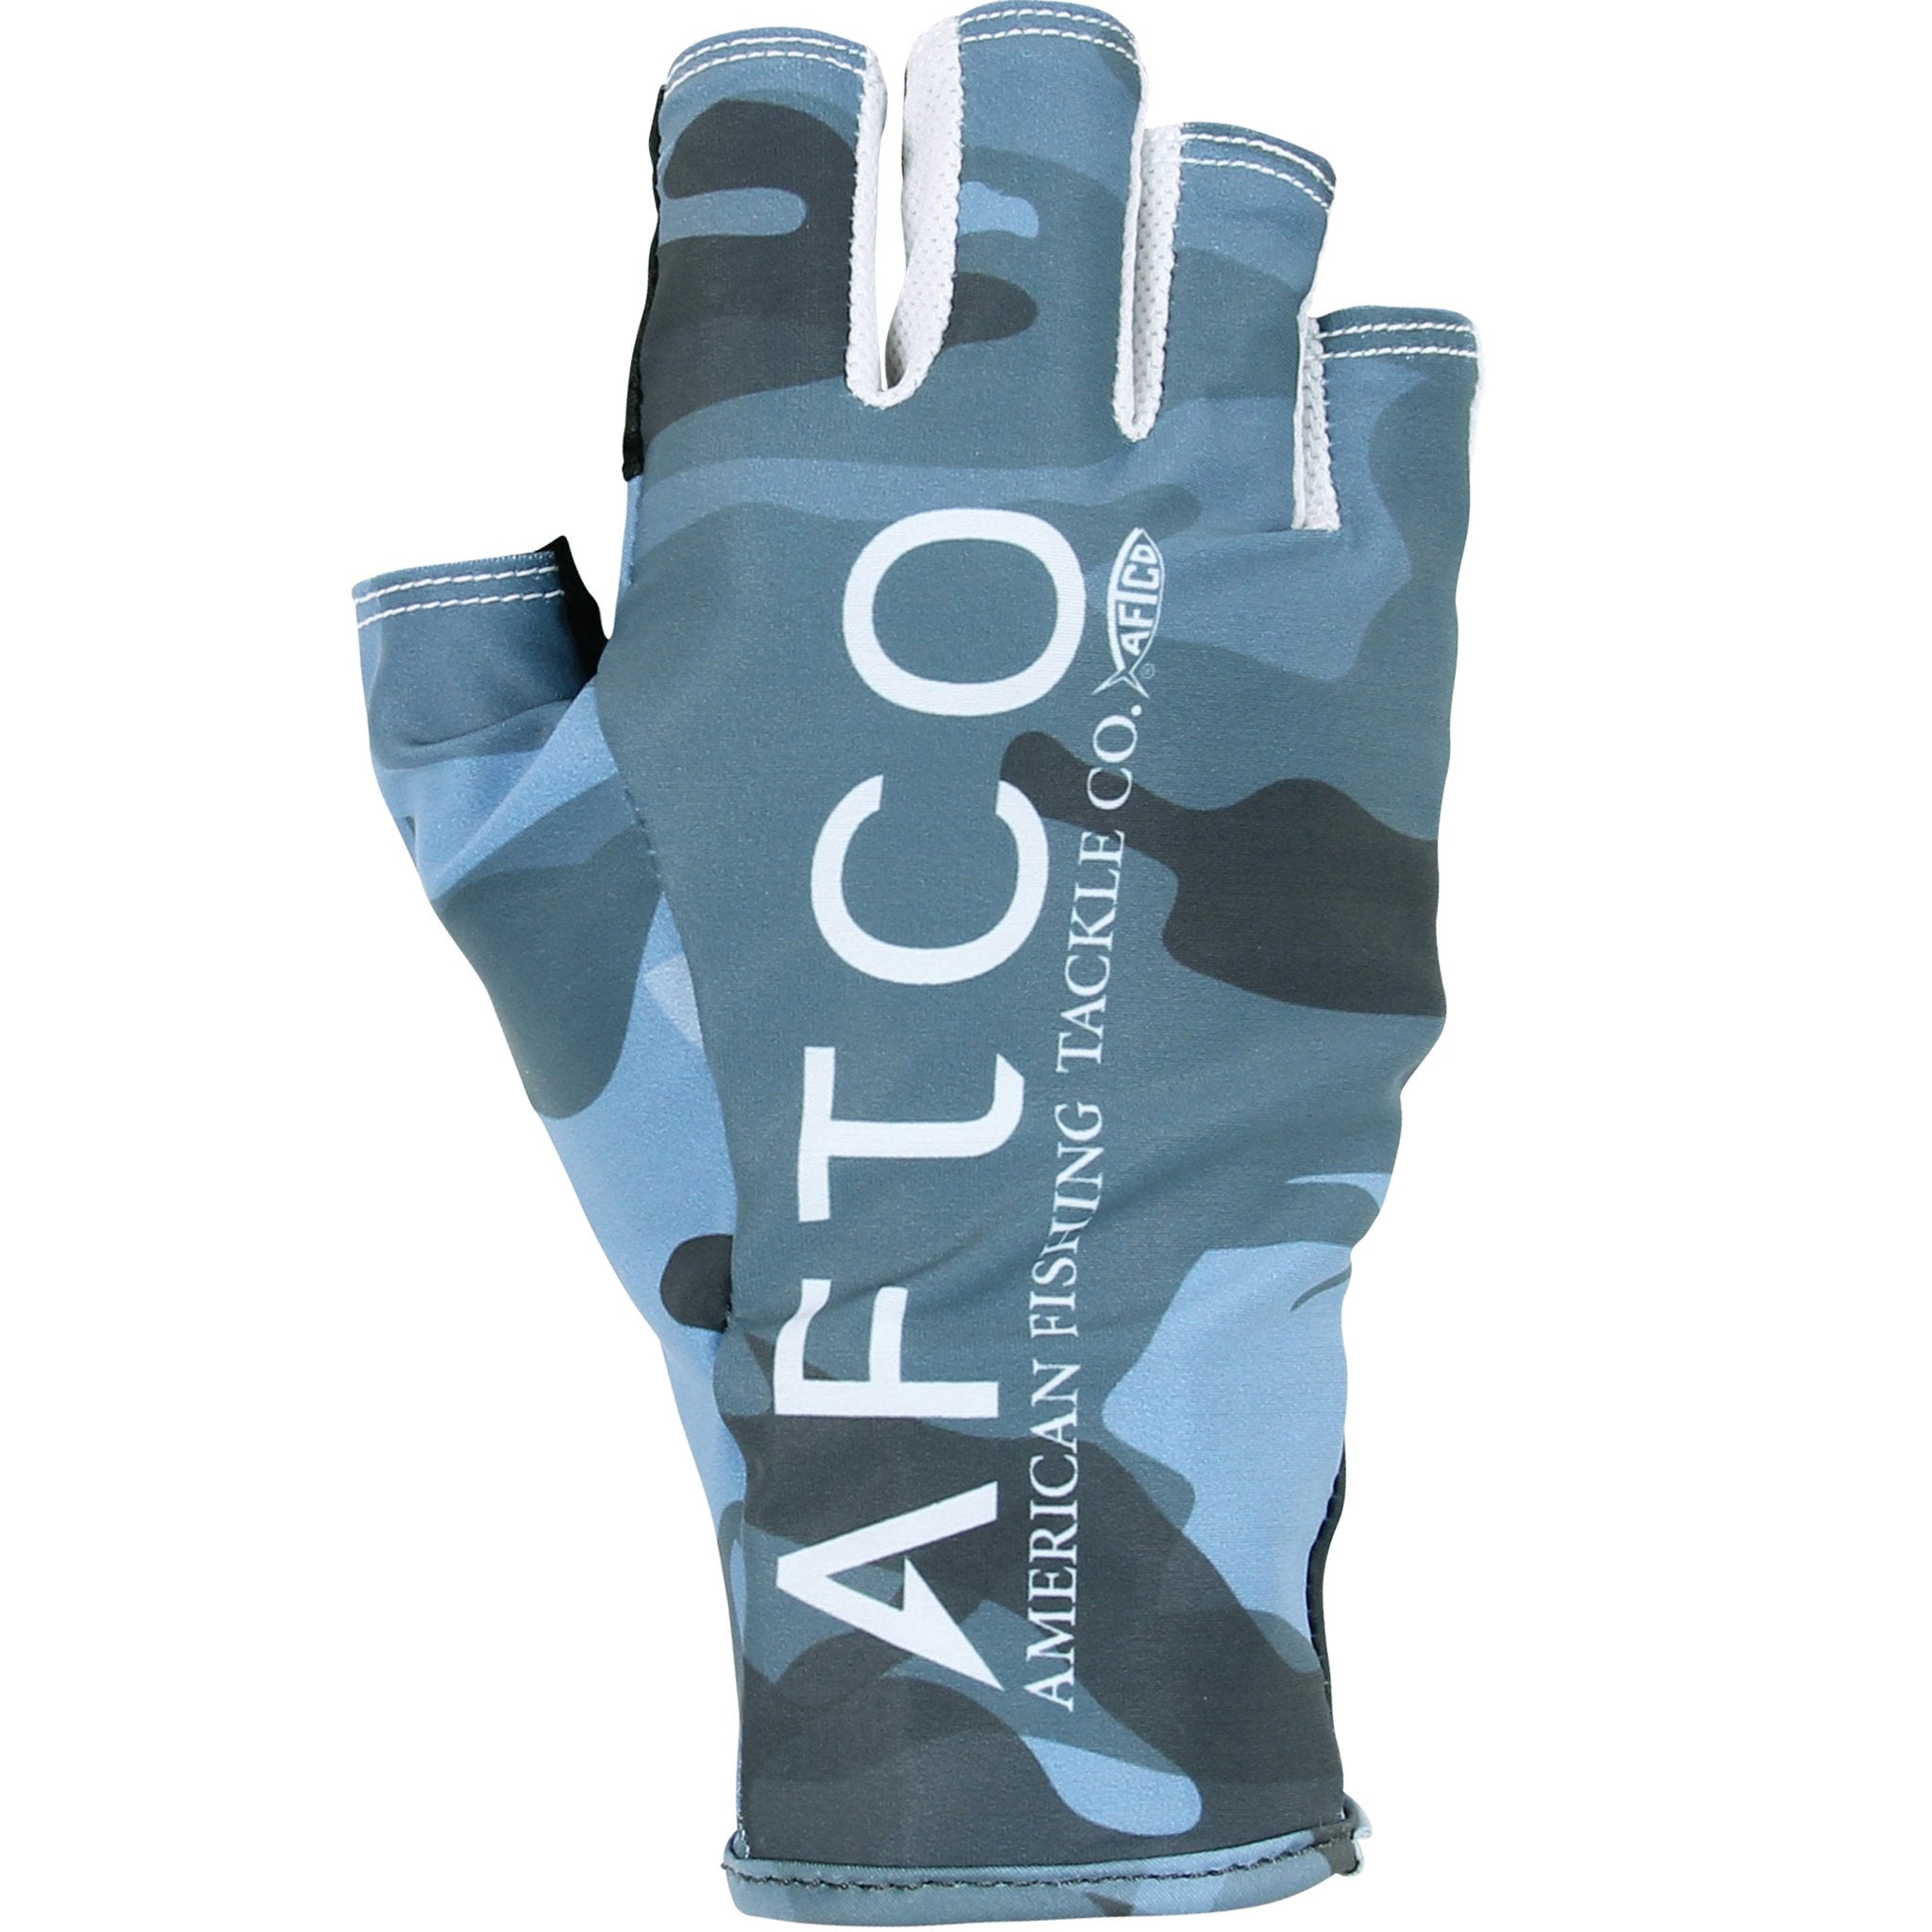 My @aftco gloves keep my hands protected from the sun, and safe